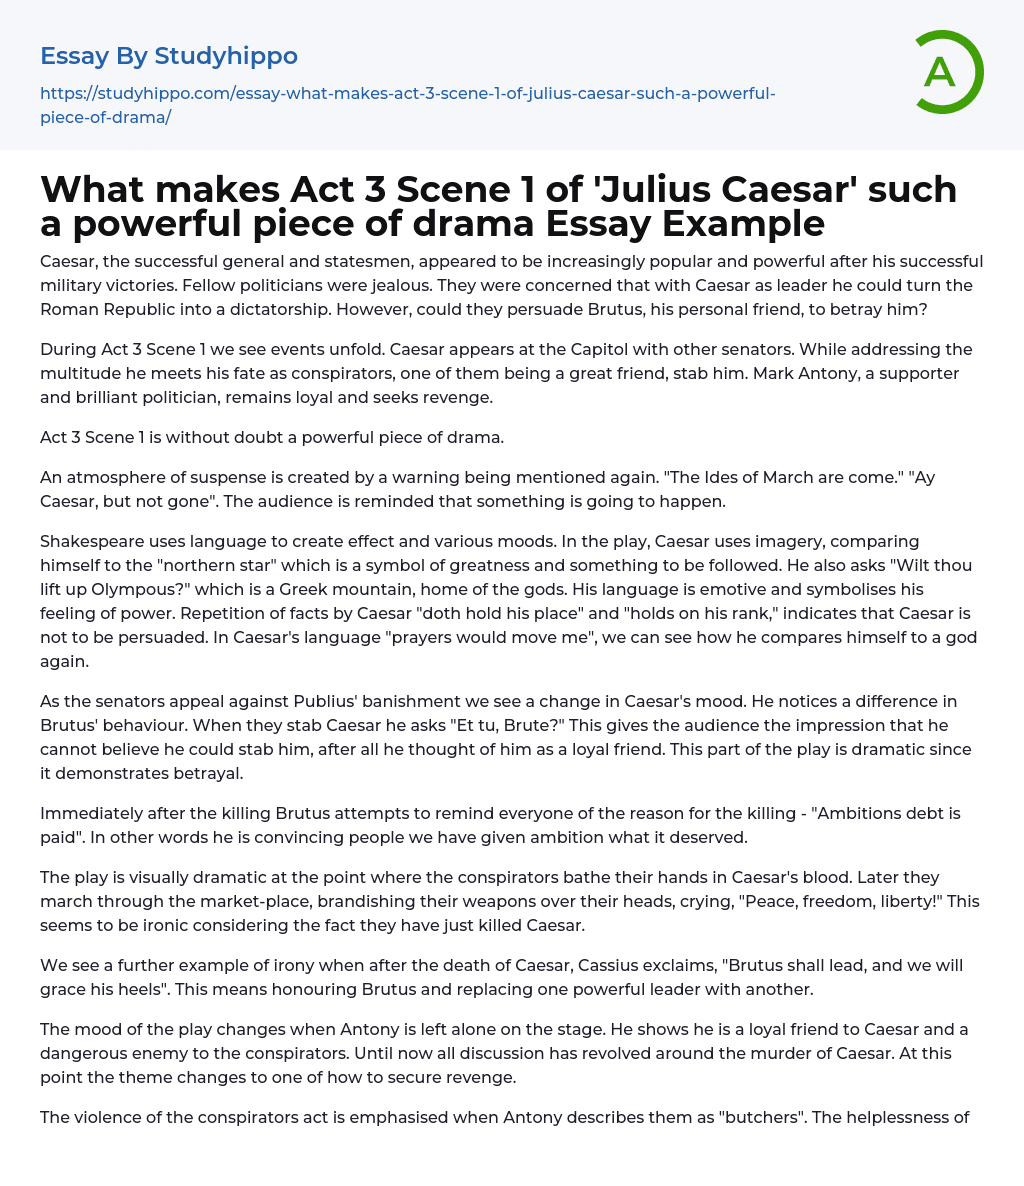 What makes Act 3 Scene 1 of ‘Julius Caesar’ such a powerful piece of drama Essay Example